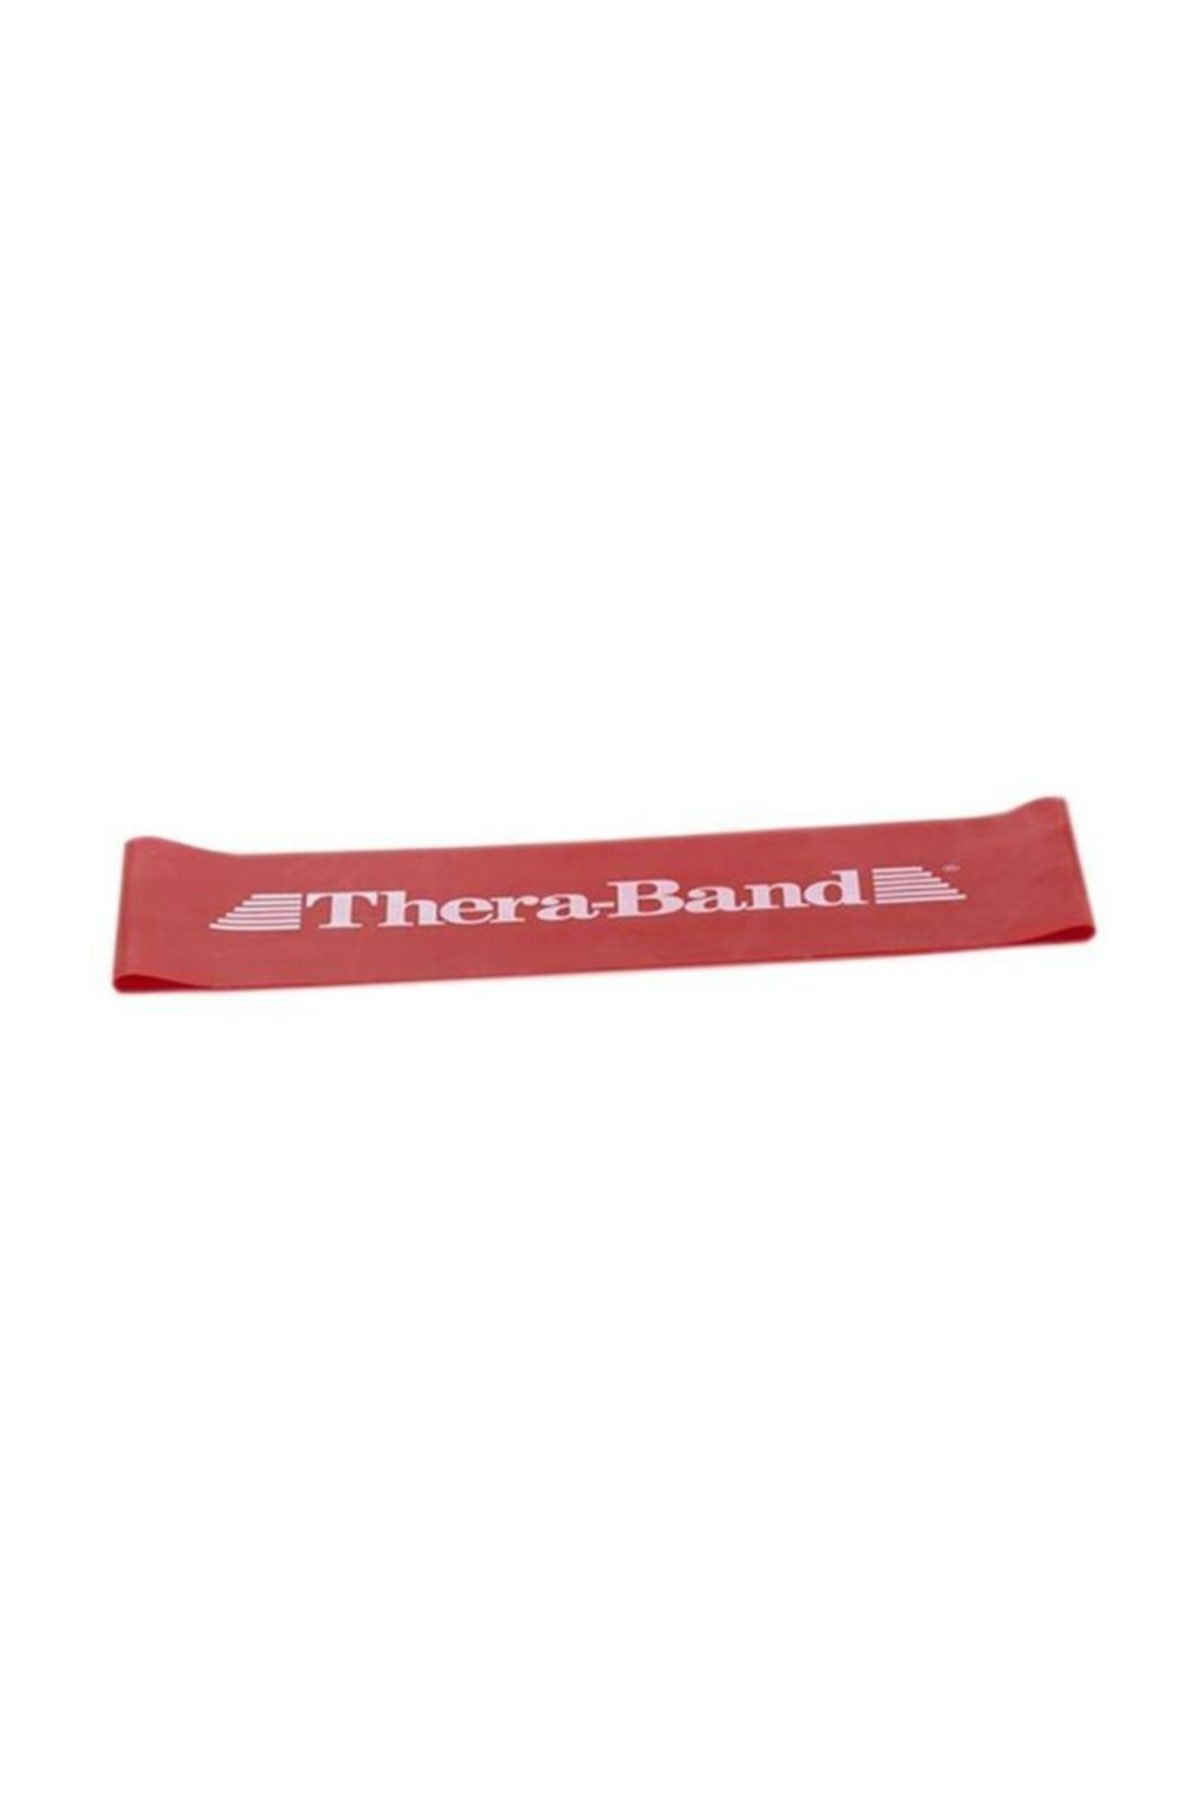 Theraband Resıstance Band Loop Red 8"